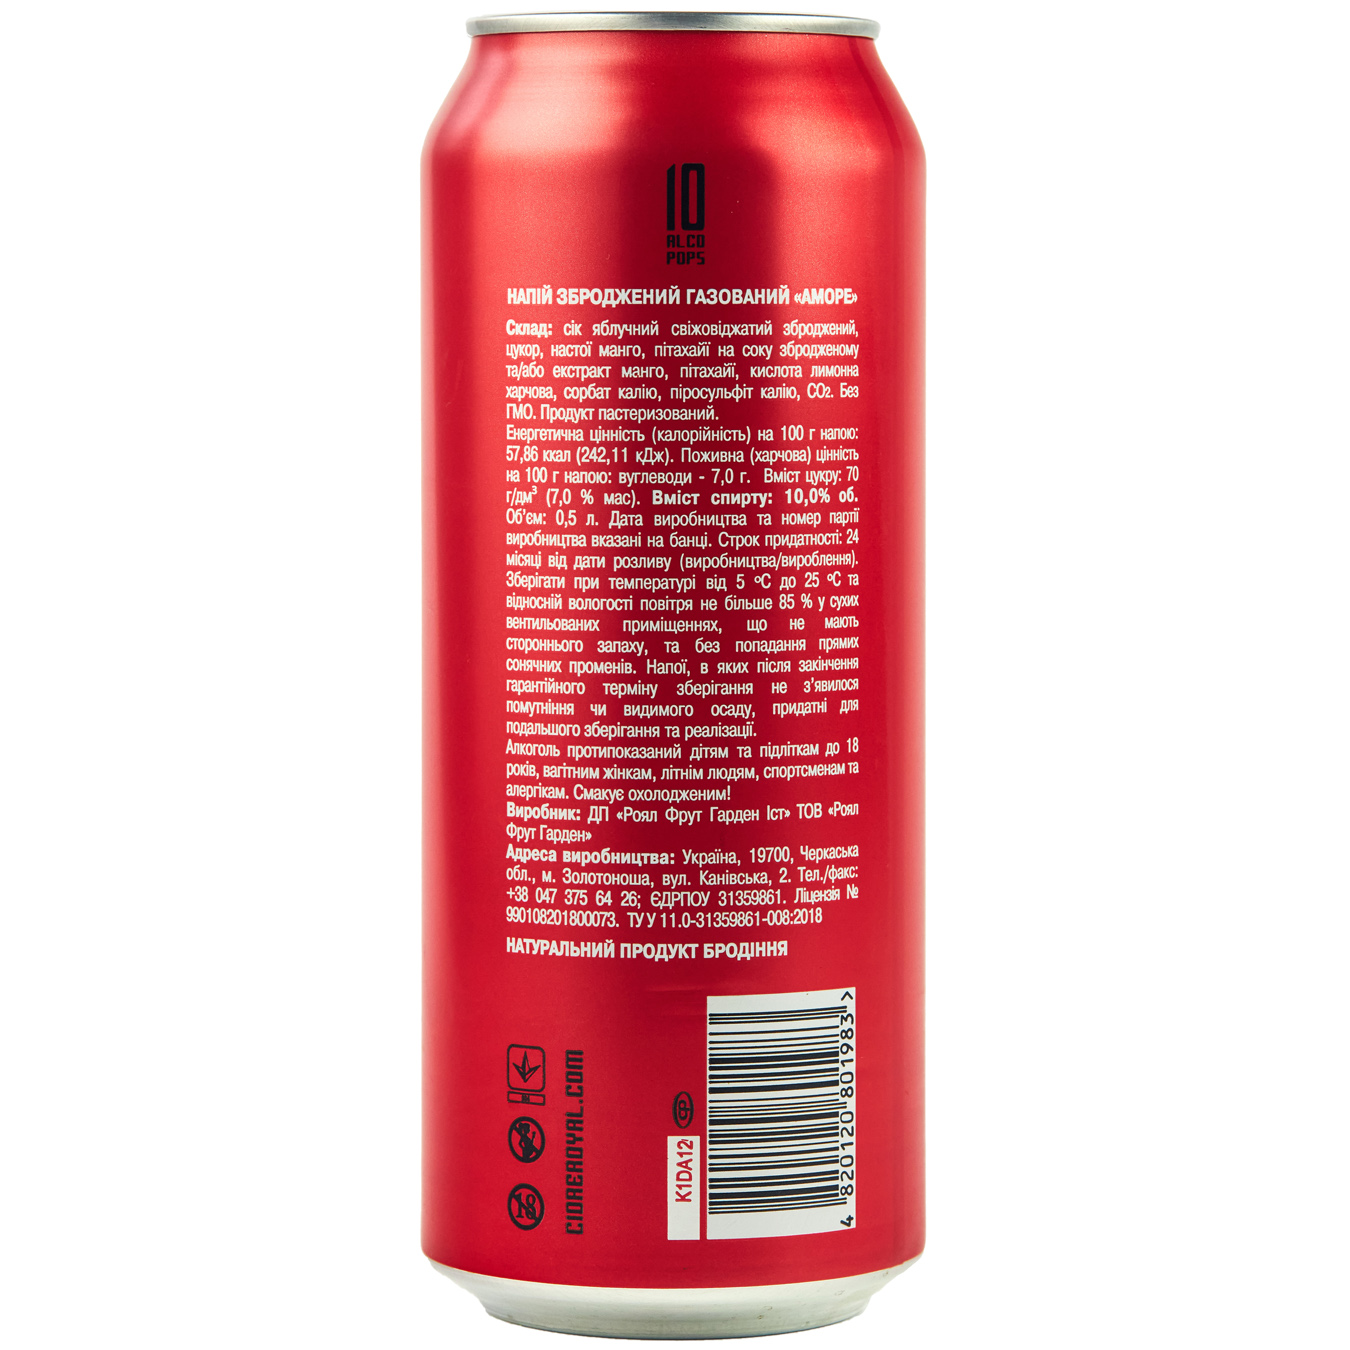 Fermented drink Alco Pops Amore carbonated 10% 0.5 l 2